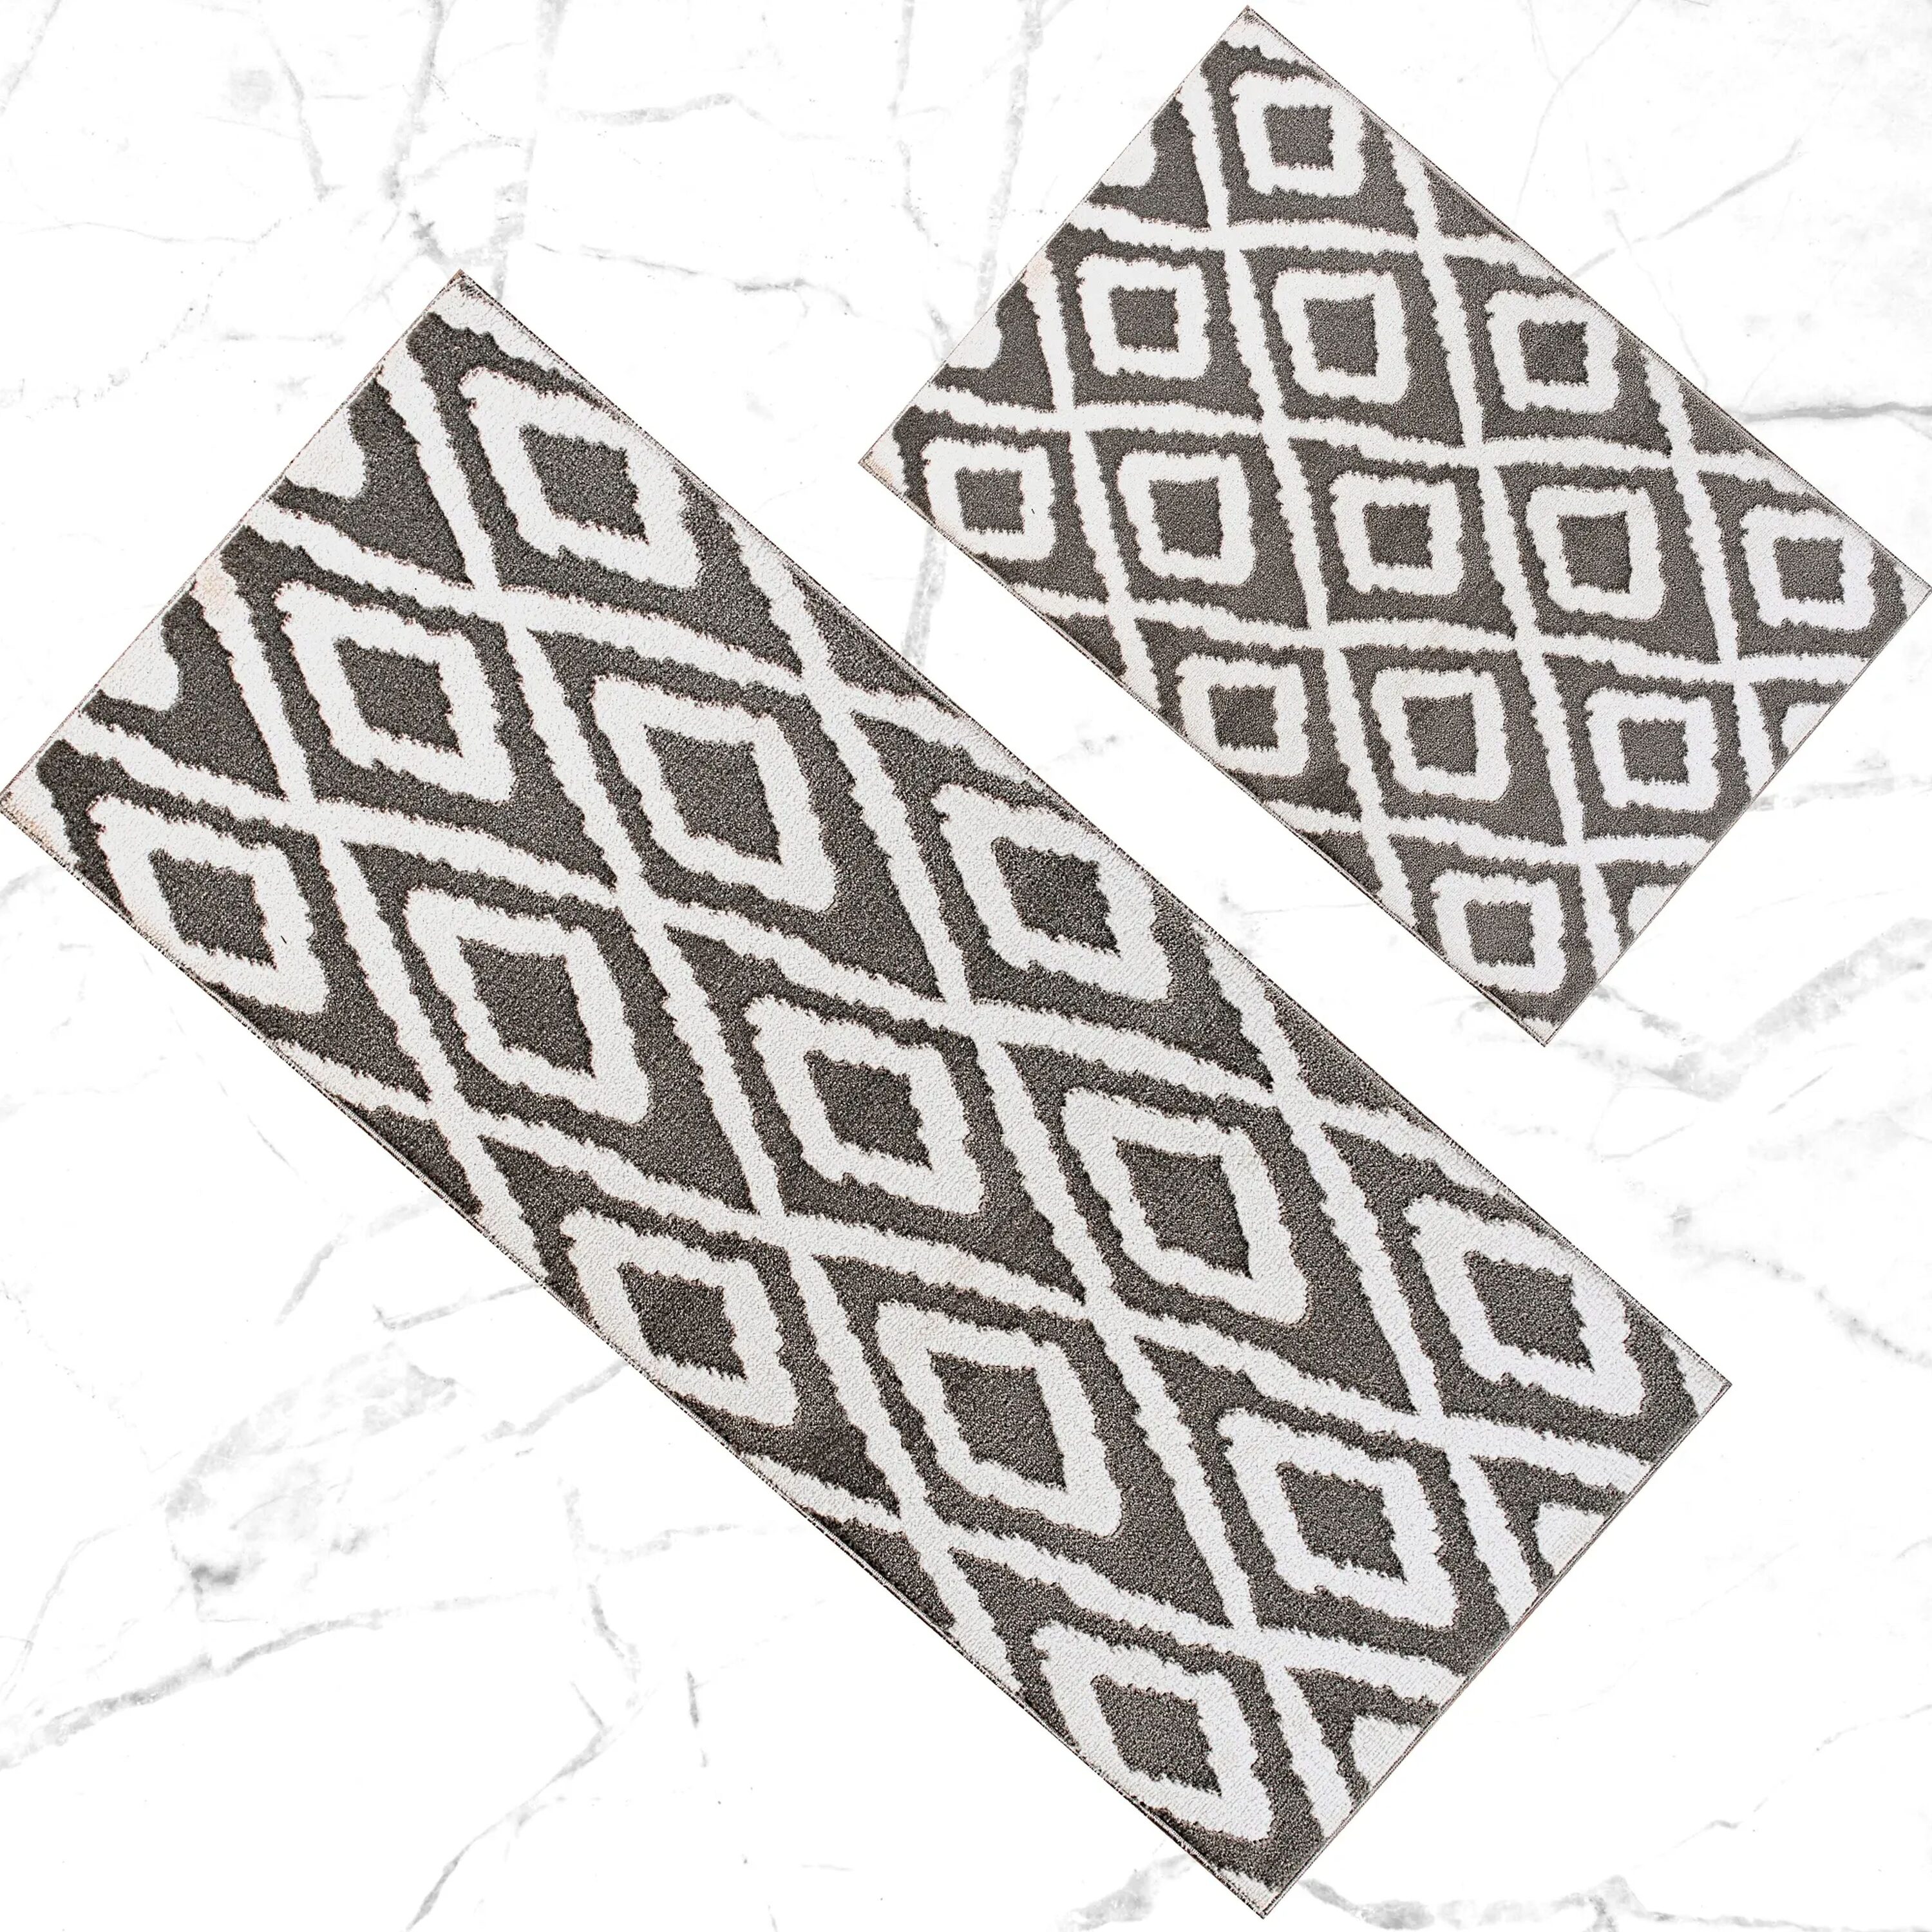 The Sofia Rugs Absorbent and Non-Slip 2 Piece Kitchen Rug Set - 20-inx48-in  and 20-inx30-in - Machine Washable - Rubber Backed Kitchen Mats in the Bathroom  Rugs & Mats department at